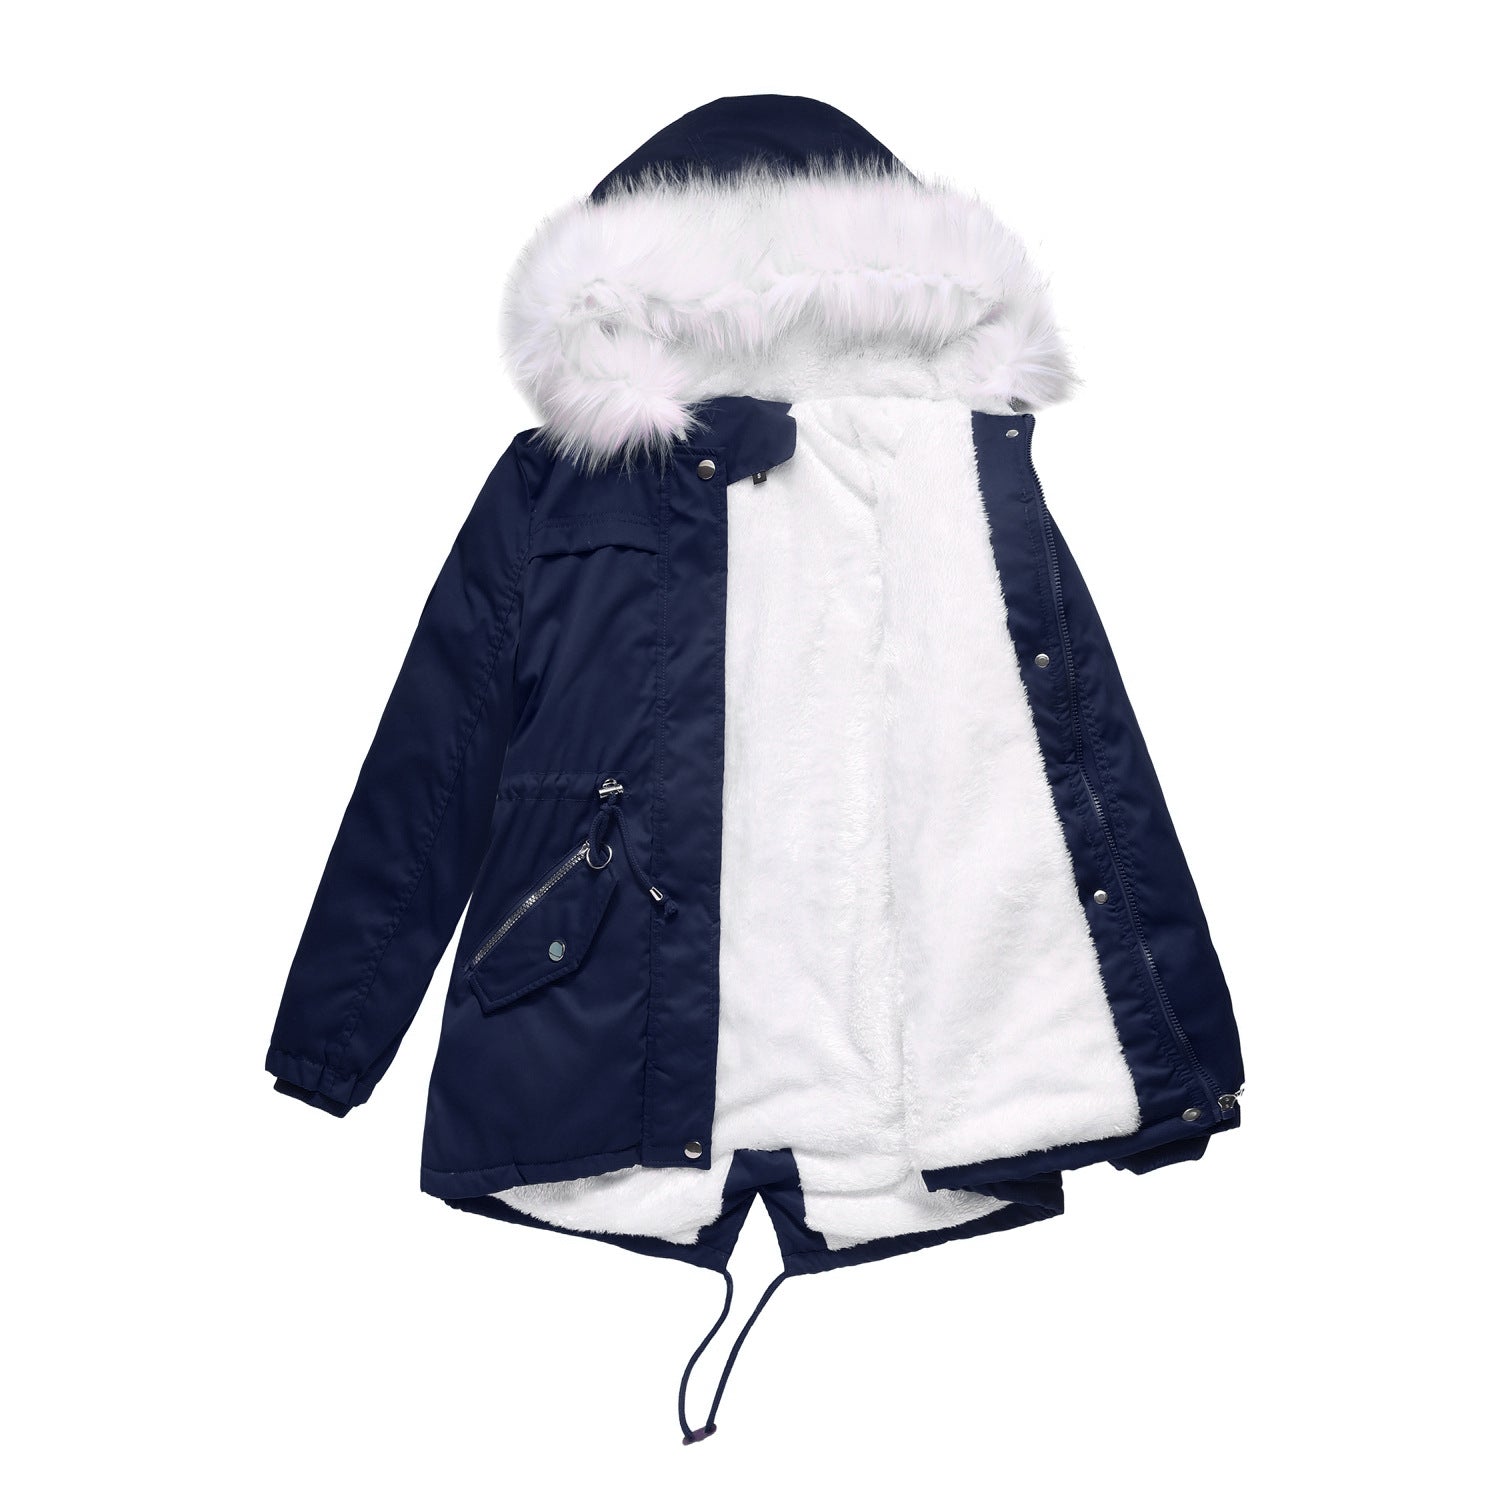 Women Cotton Padded Coat with White Fur Collar Parka Mid Length